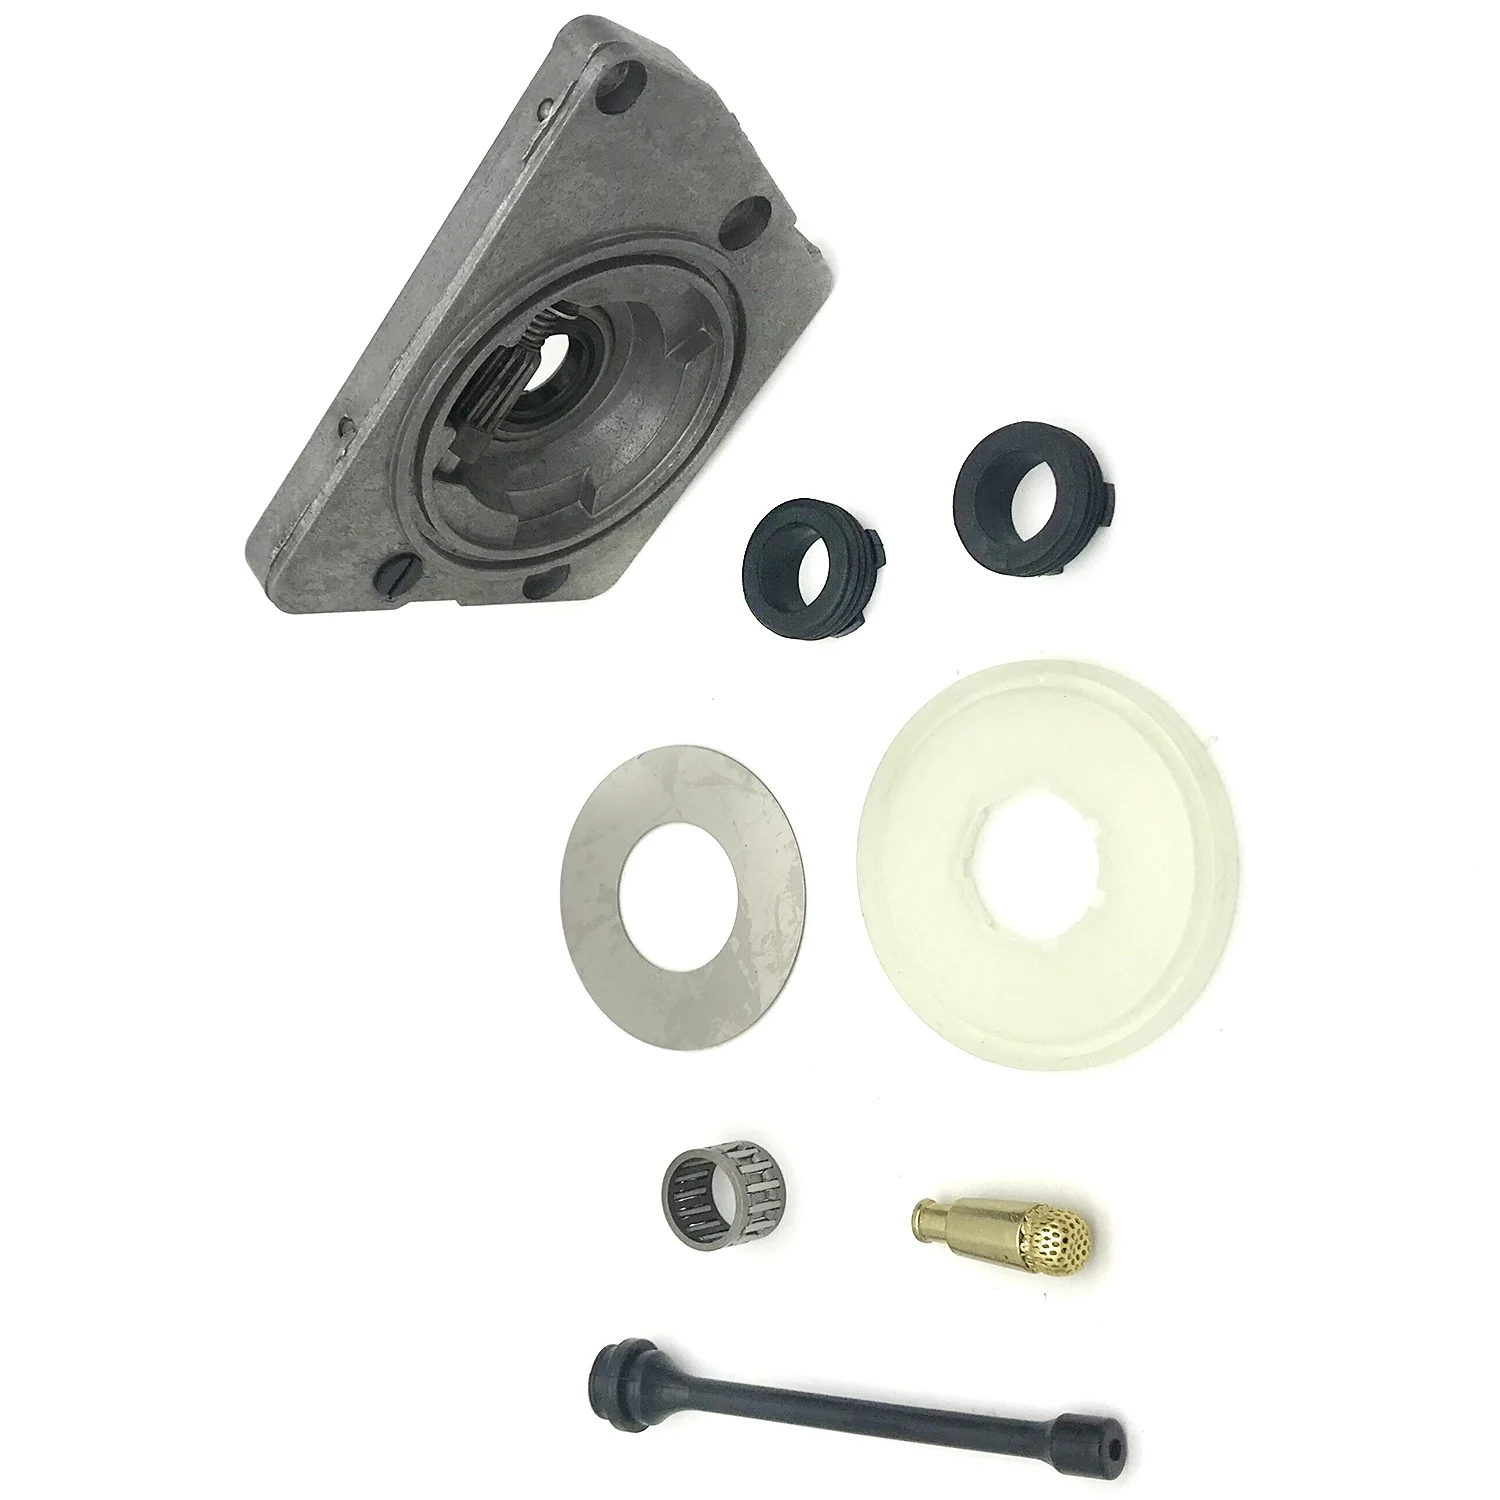 Oil Pump Worm Gear Dust Washer Hose Filter Kit Fit for HUSQVARNA 61 66 266 268 272 XP 266XP 268XP 272XP Chainsaw Parts